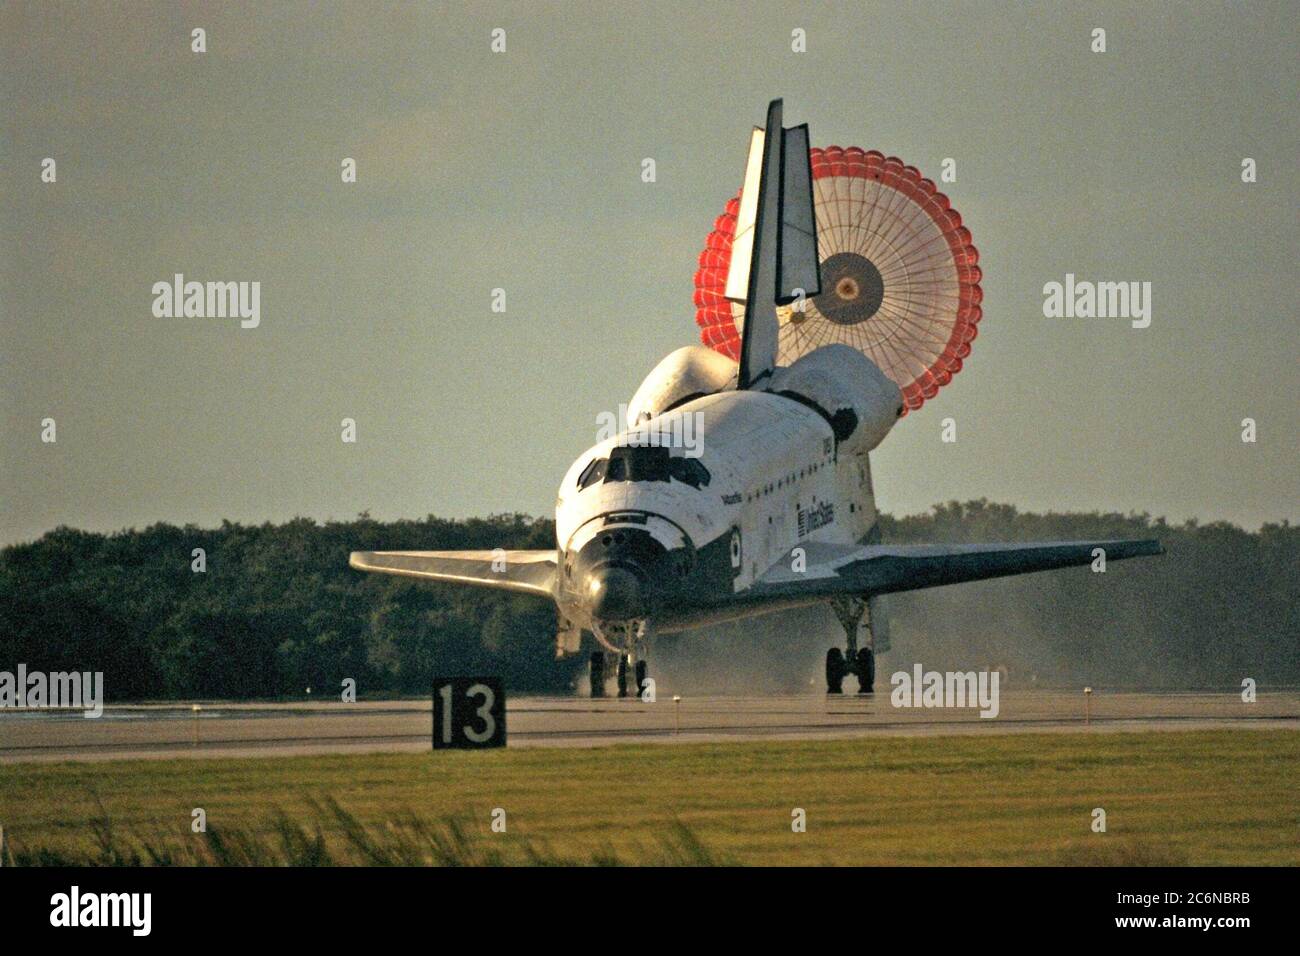 KENNEDY SPACE CENTER, Fla. -- The orbiter drag chute deploys after the Space Shuttle orbiter Atlantis lands on Runway 15 of the KSC Shuttle Landing Facility (SLF) at the conclusion of the nearly 11-day STS-86 mission. Main gear touchdown was at 5:55:09 p.m. EDT, Oct. 6, 1997, with an unofficial mission-elapsed time of 10 days, 19 hours, 20 minutes and 50 seconds. The first two KSC landing opportunities on Sunday were waved off because of weather concerns. The 87th Space Shuttle mission was the 40th landing of the Shuttle at KSC. On Sunday evening, the Space Shuttle program reached a milestone: Stock Photo